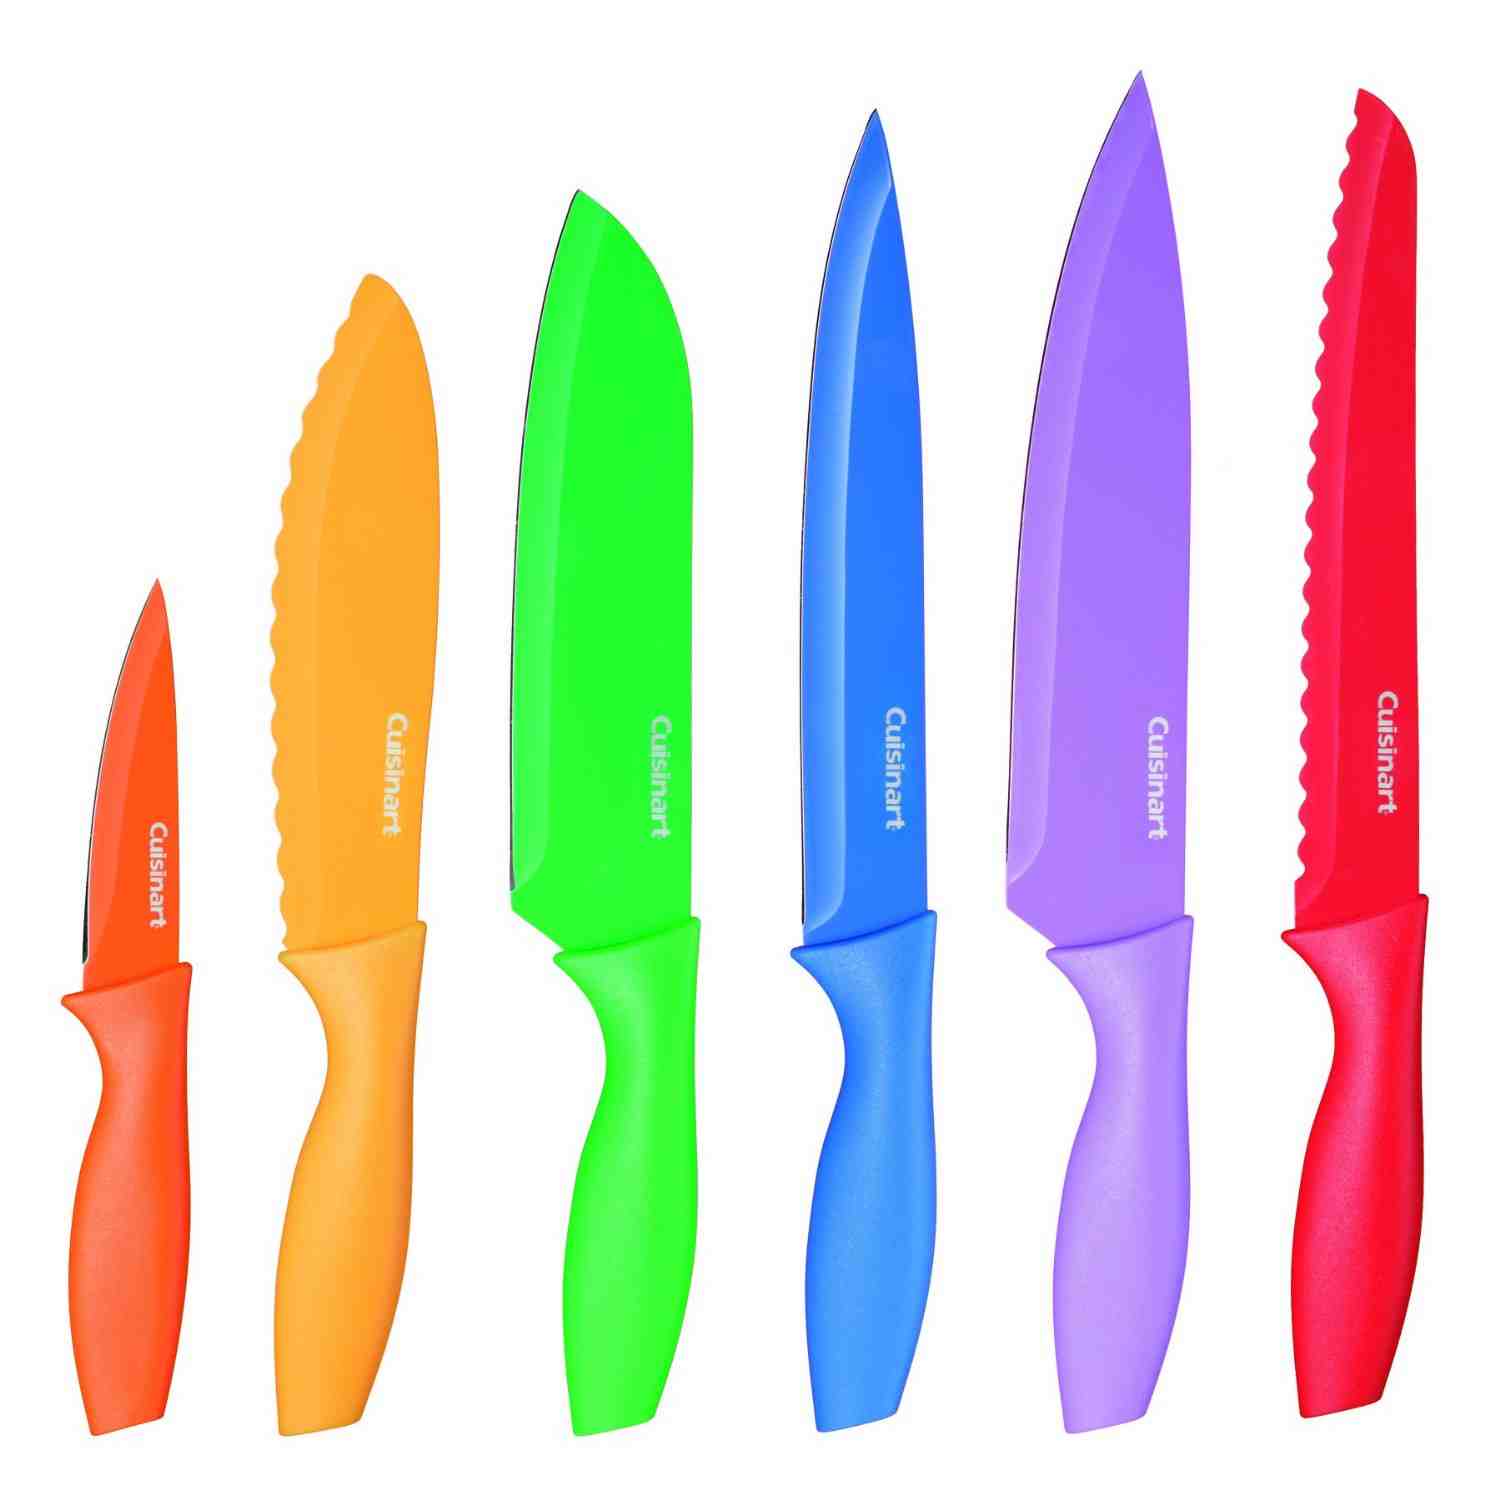 Cuisinart 12pc Colour Knife Set with Blade Guards